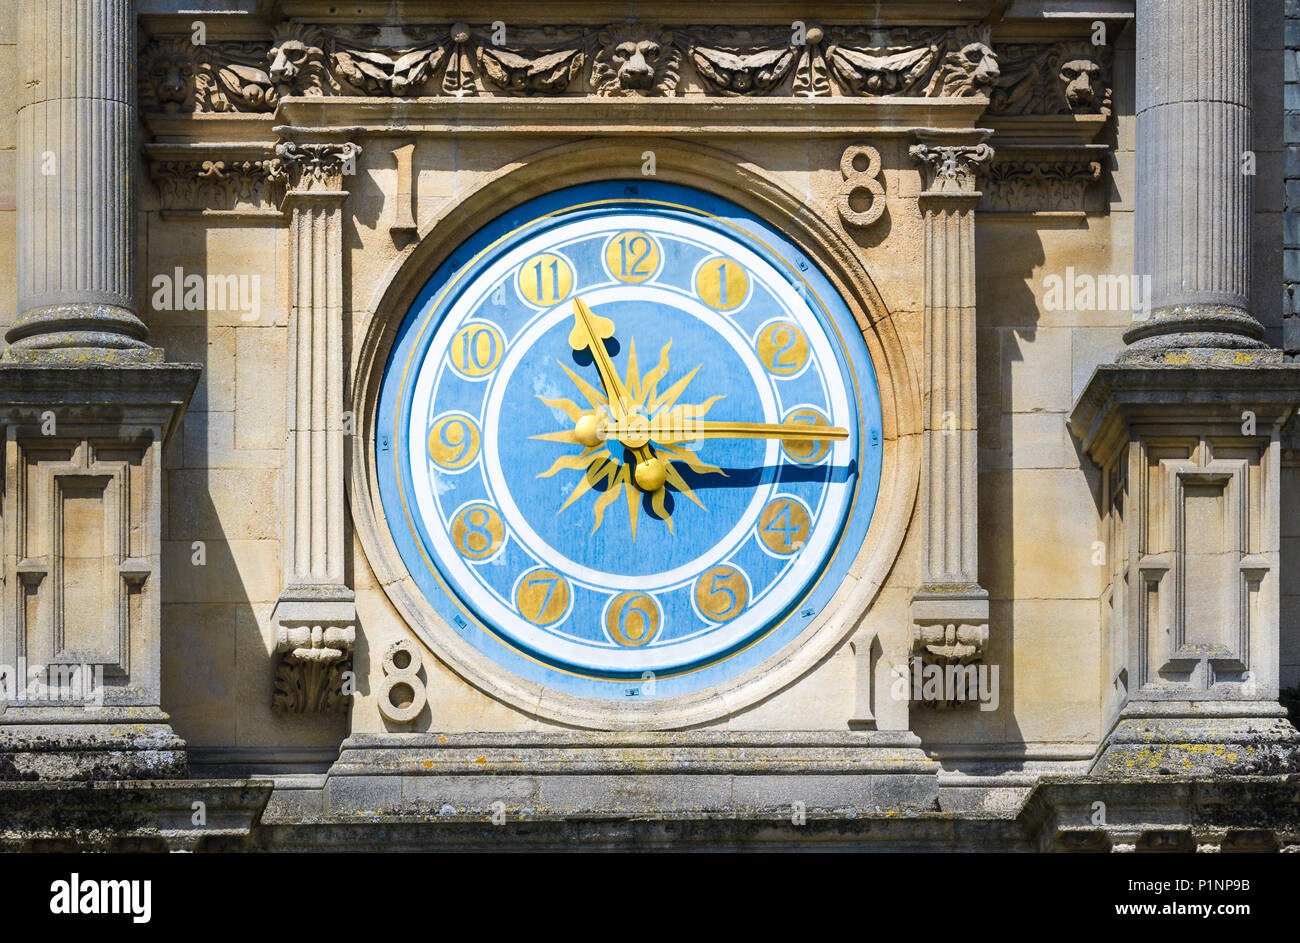 Clock on the wall of the Examinations School at the university of Oxford, England. Stock Photo